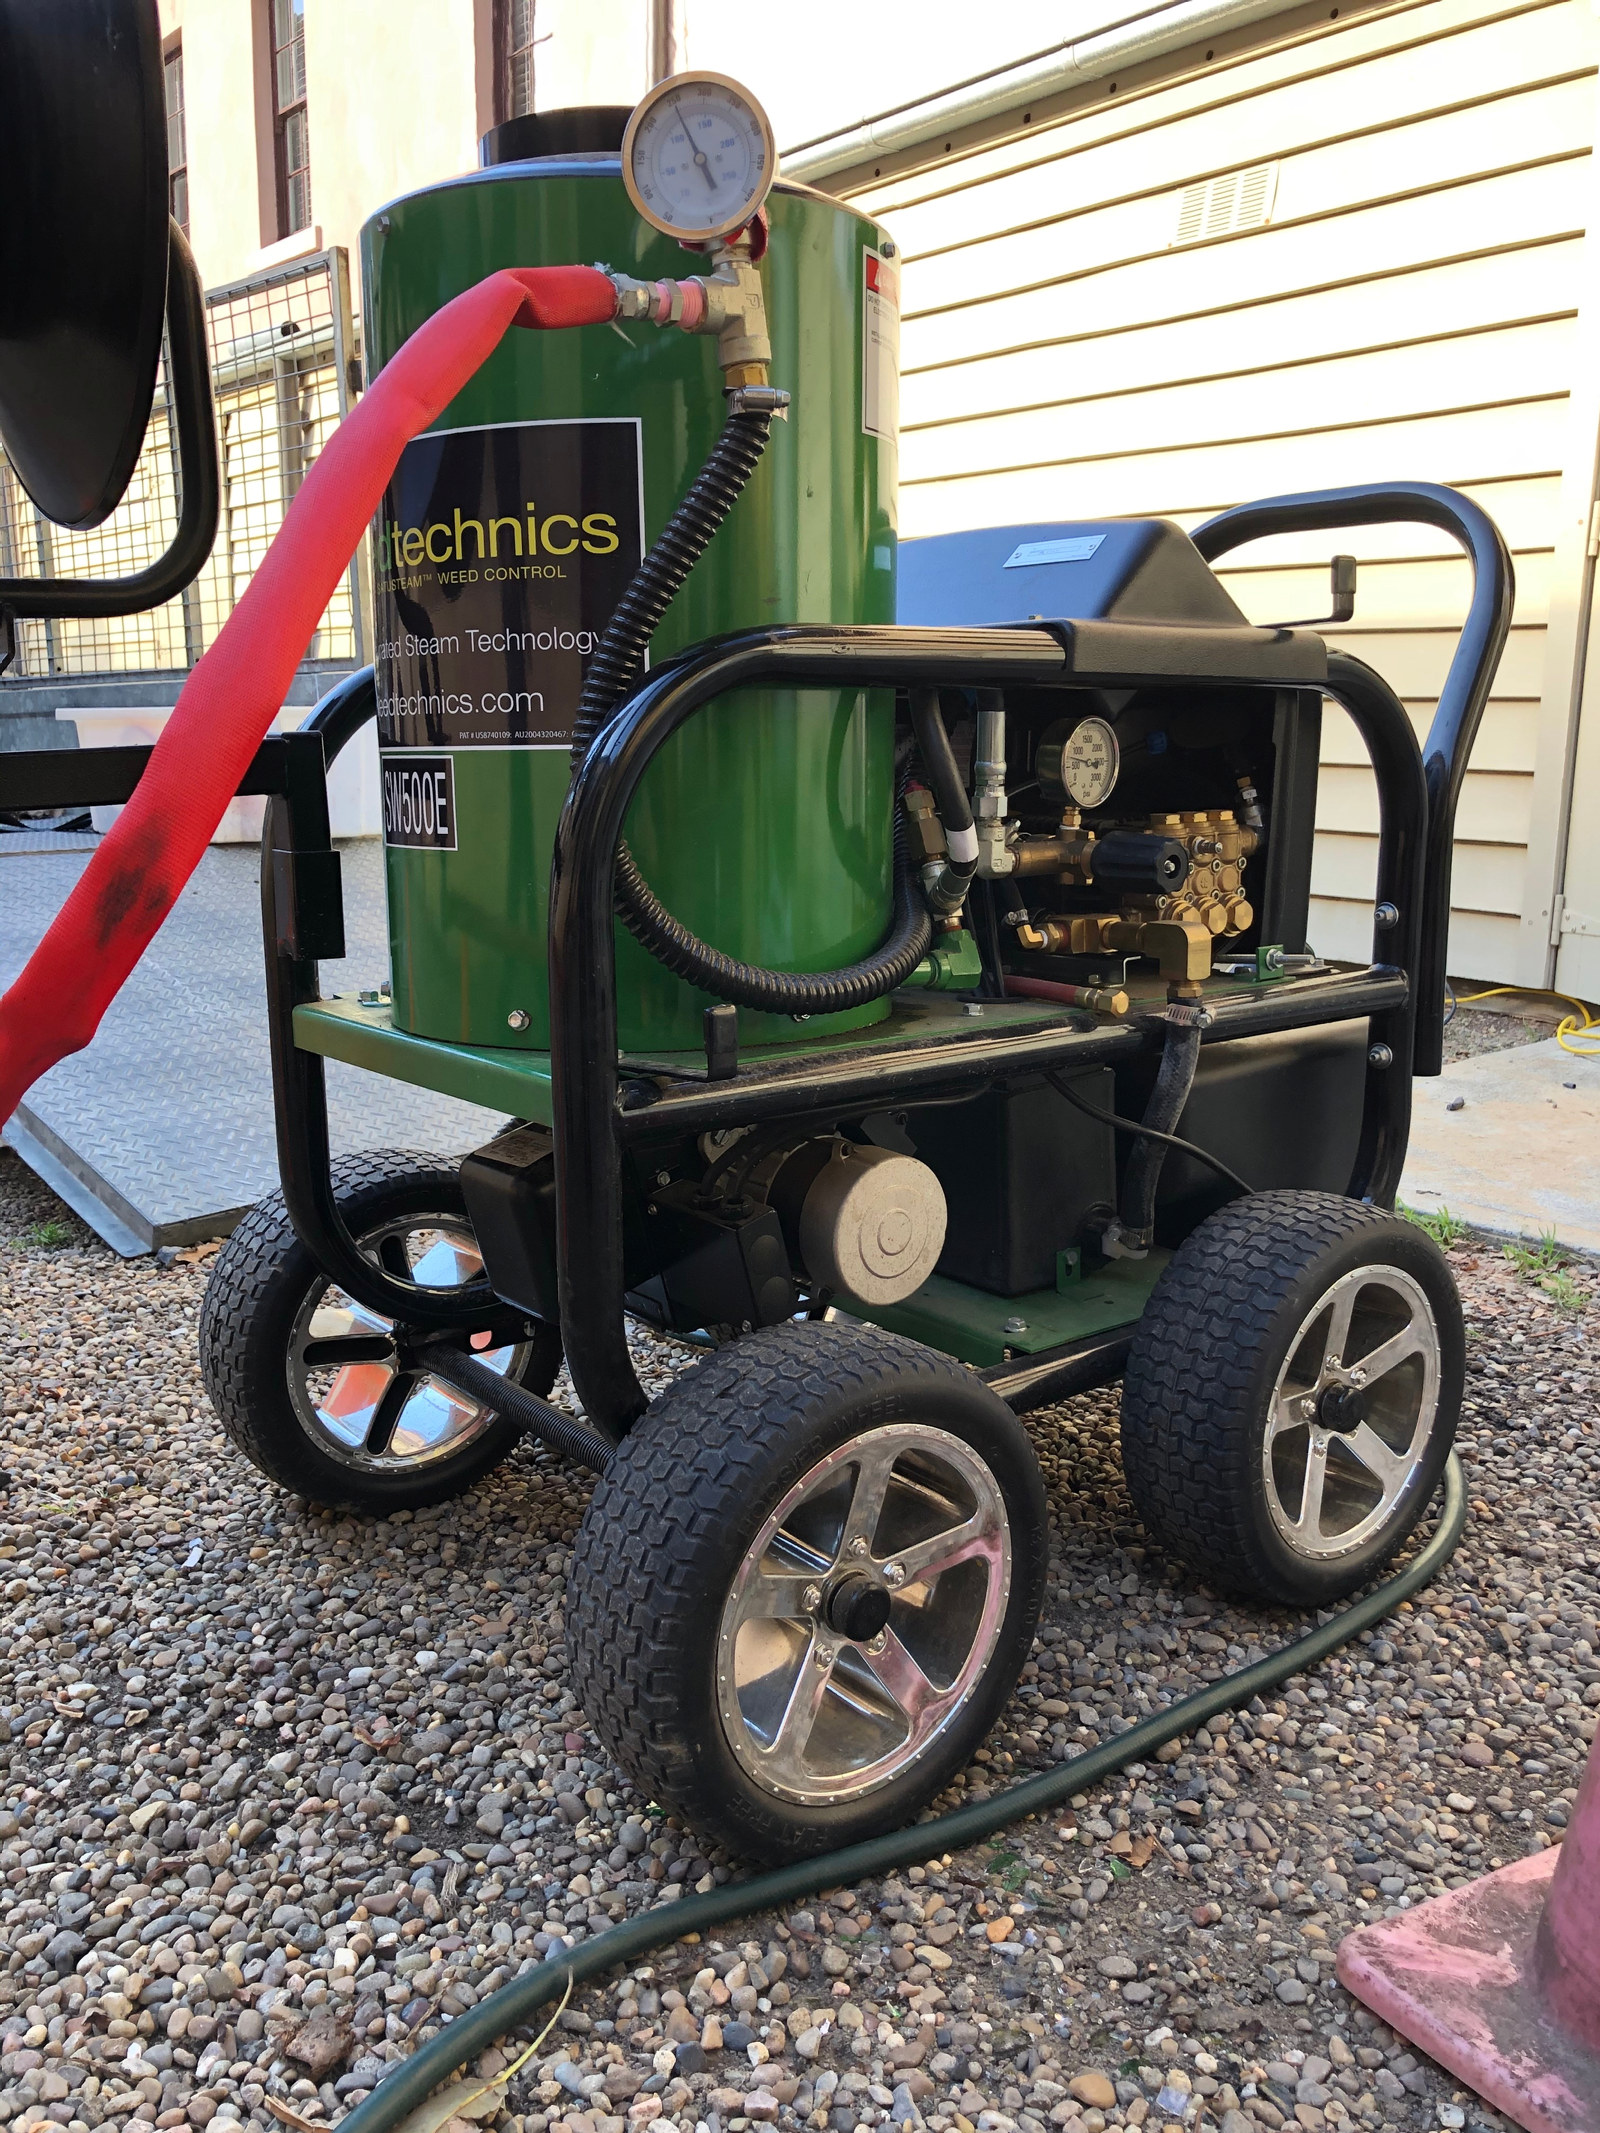 the steam weeding machine is green and black and has a little chimney sticking out the top.